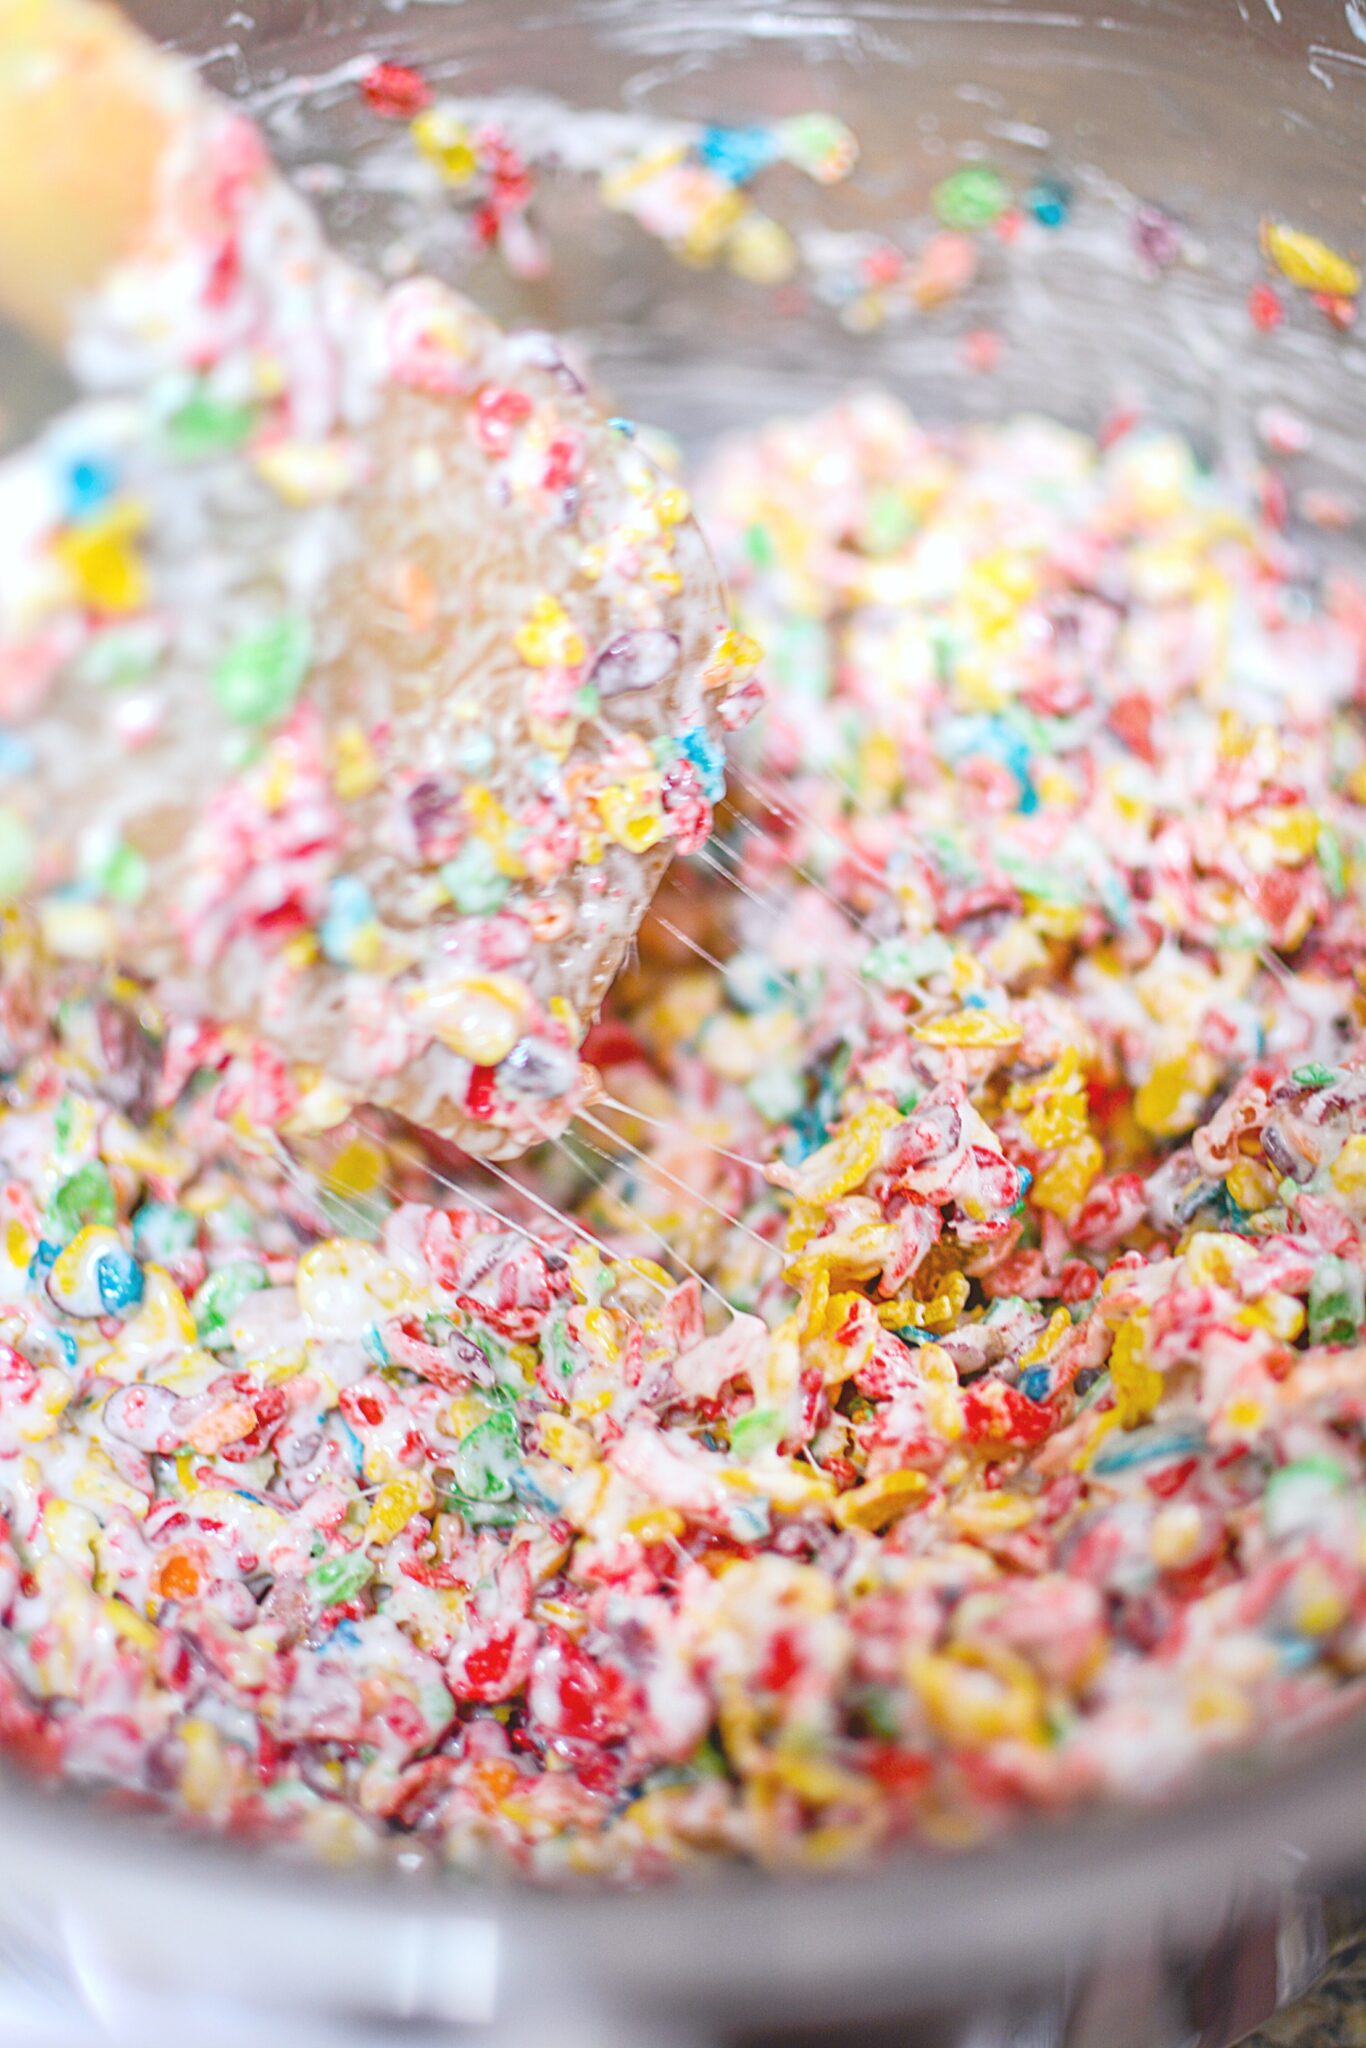 The Fruity Pebbles cereal being mixed into the marshmallow mix. 